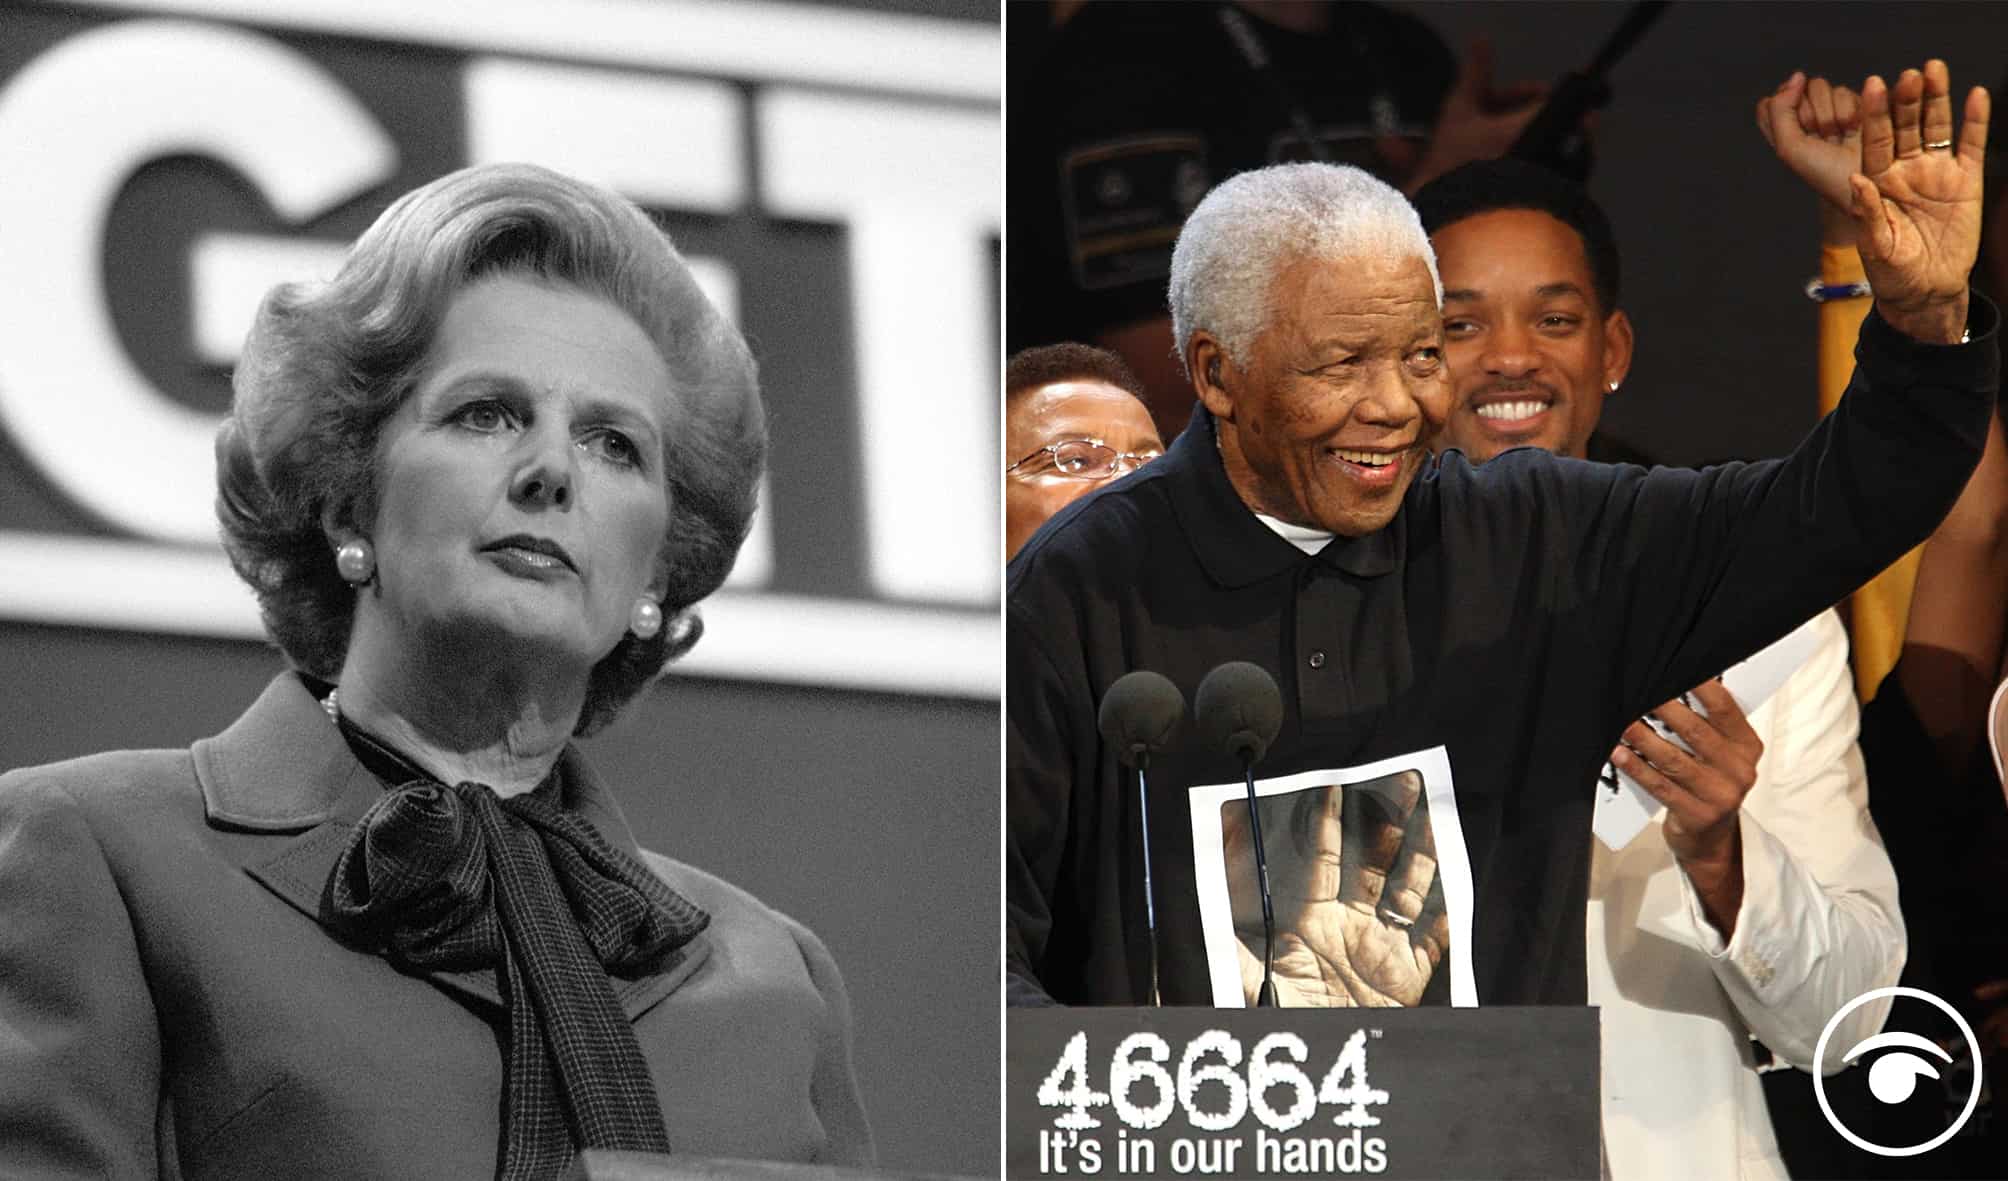 Newly revealed documents show Margaret Thatcher’s support for apartheid South Africa